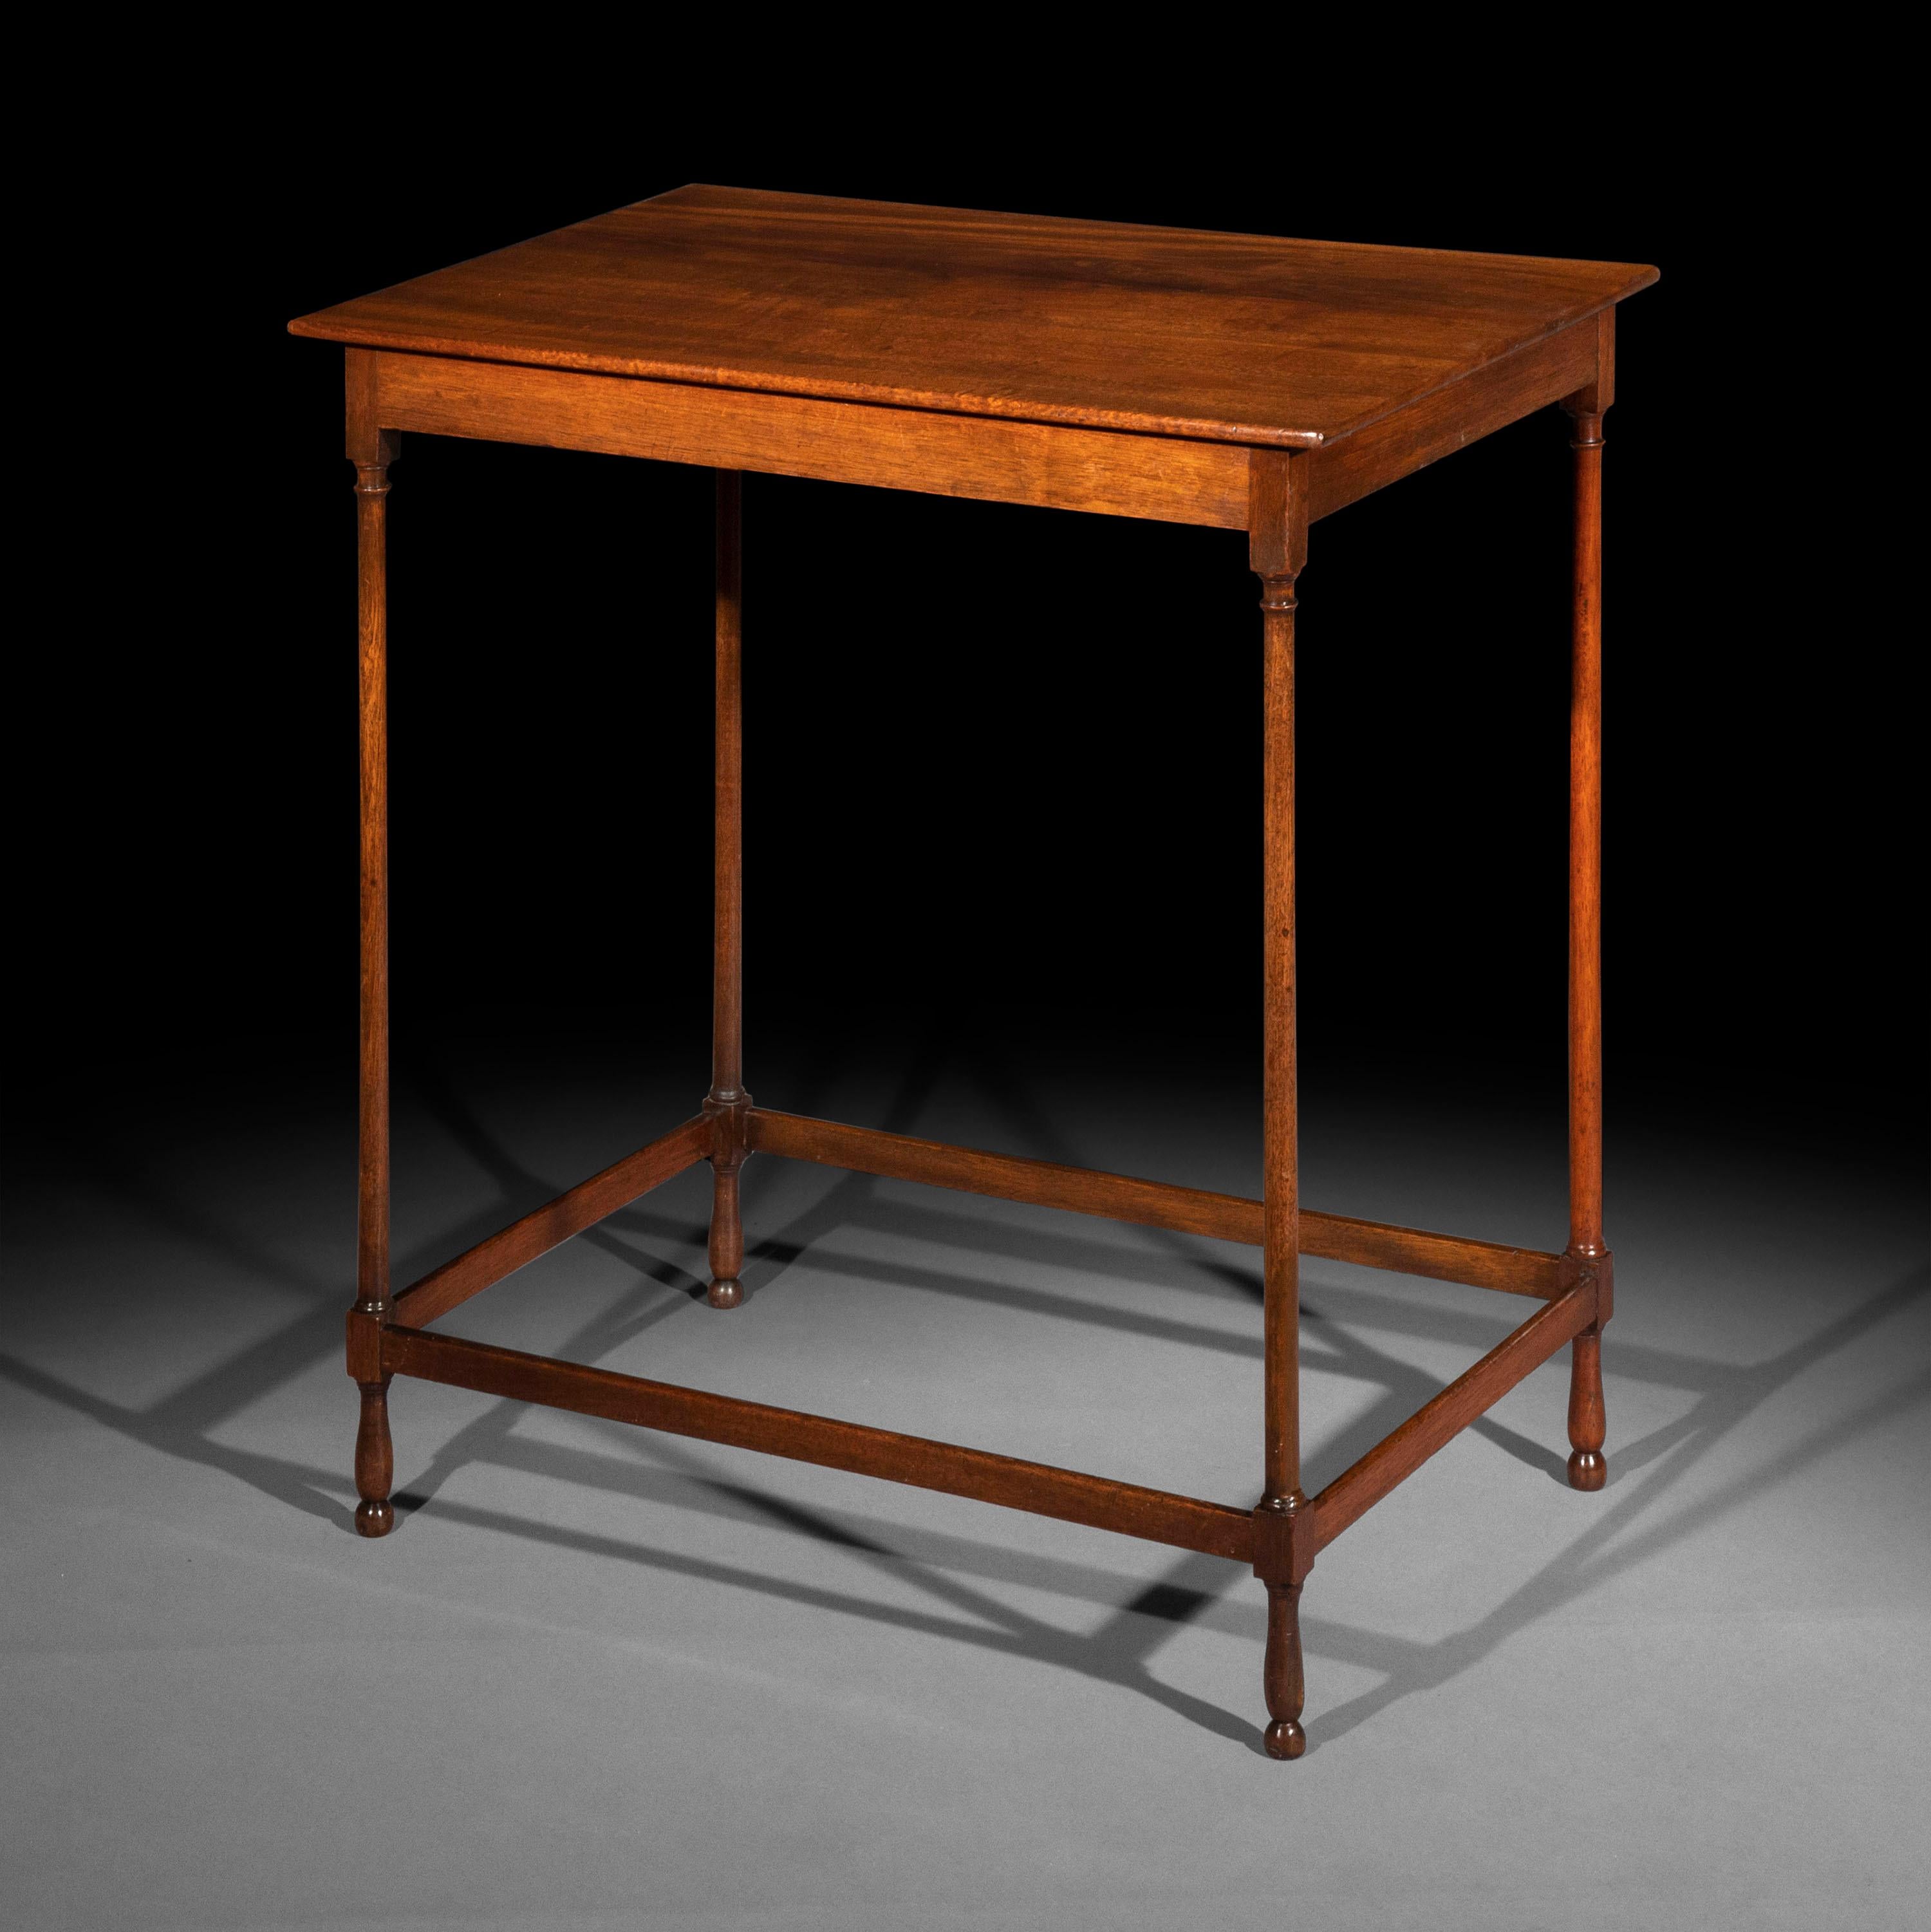 An elegant Georgian style 'Spider Leg' side table,
English or Scottish, 19th century.

Why we like it
We love the elegant simplicity of this table, the unusual thinness of its components, which lend this design a very delicate look.

A number of